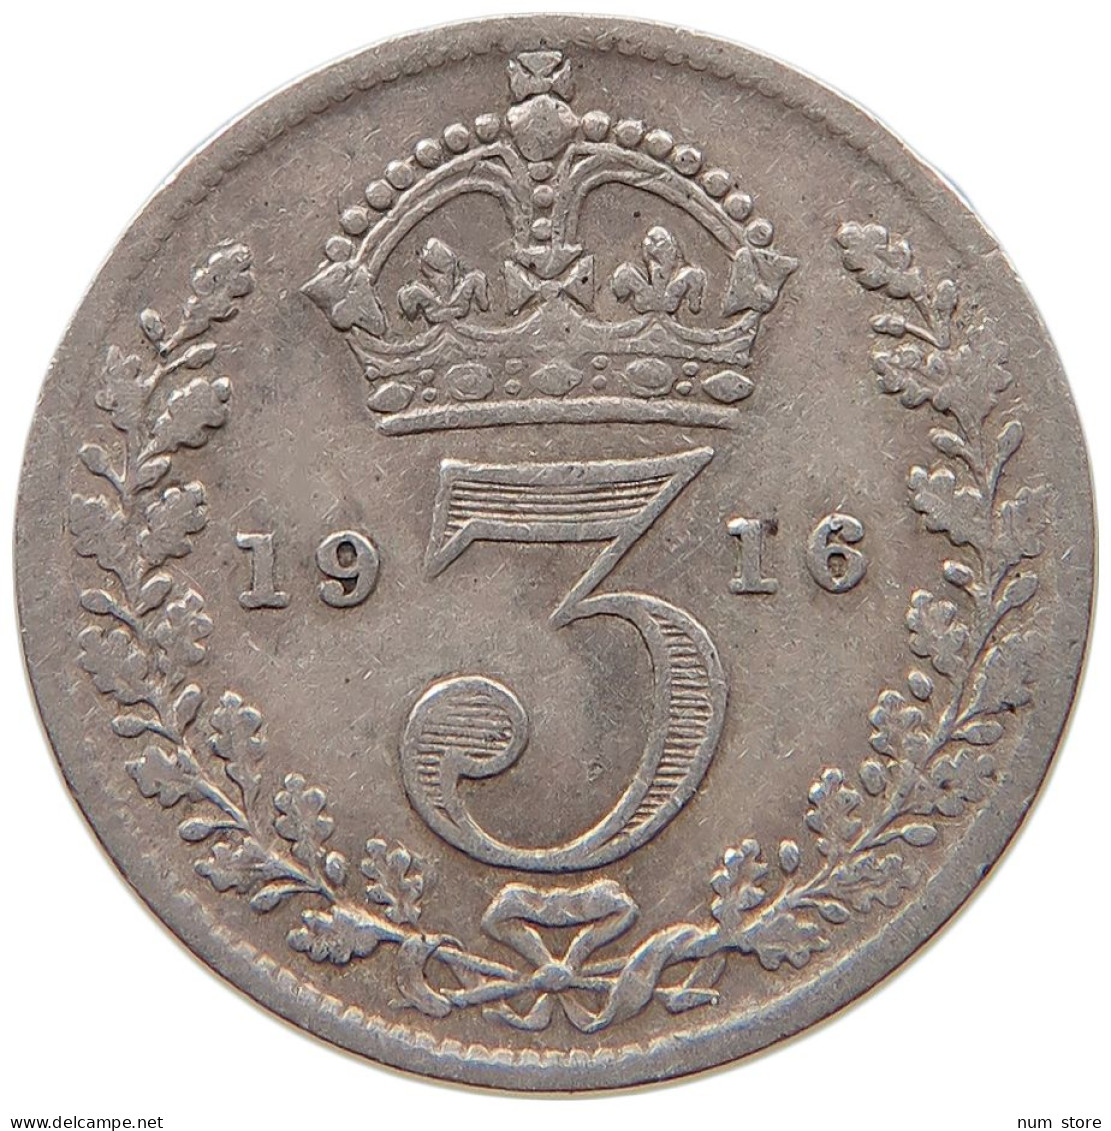 GREAT BRITAIN THREEPENCE 1916 #s031 0269 - F. 3 Pence